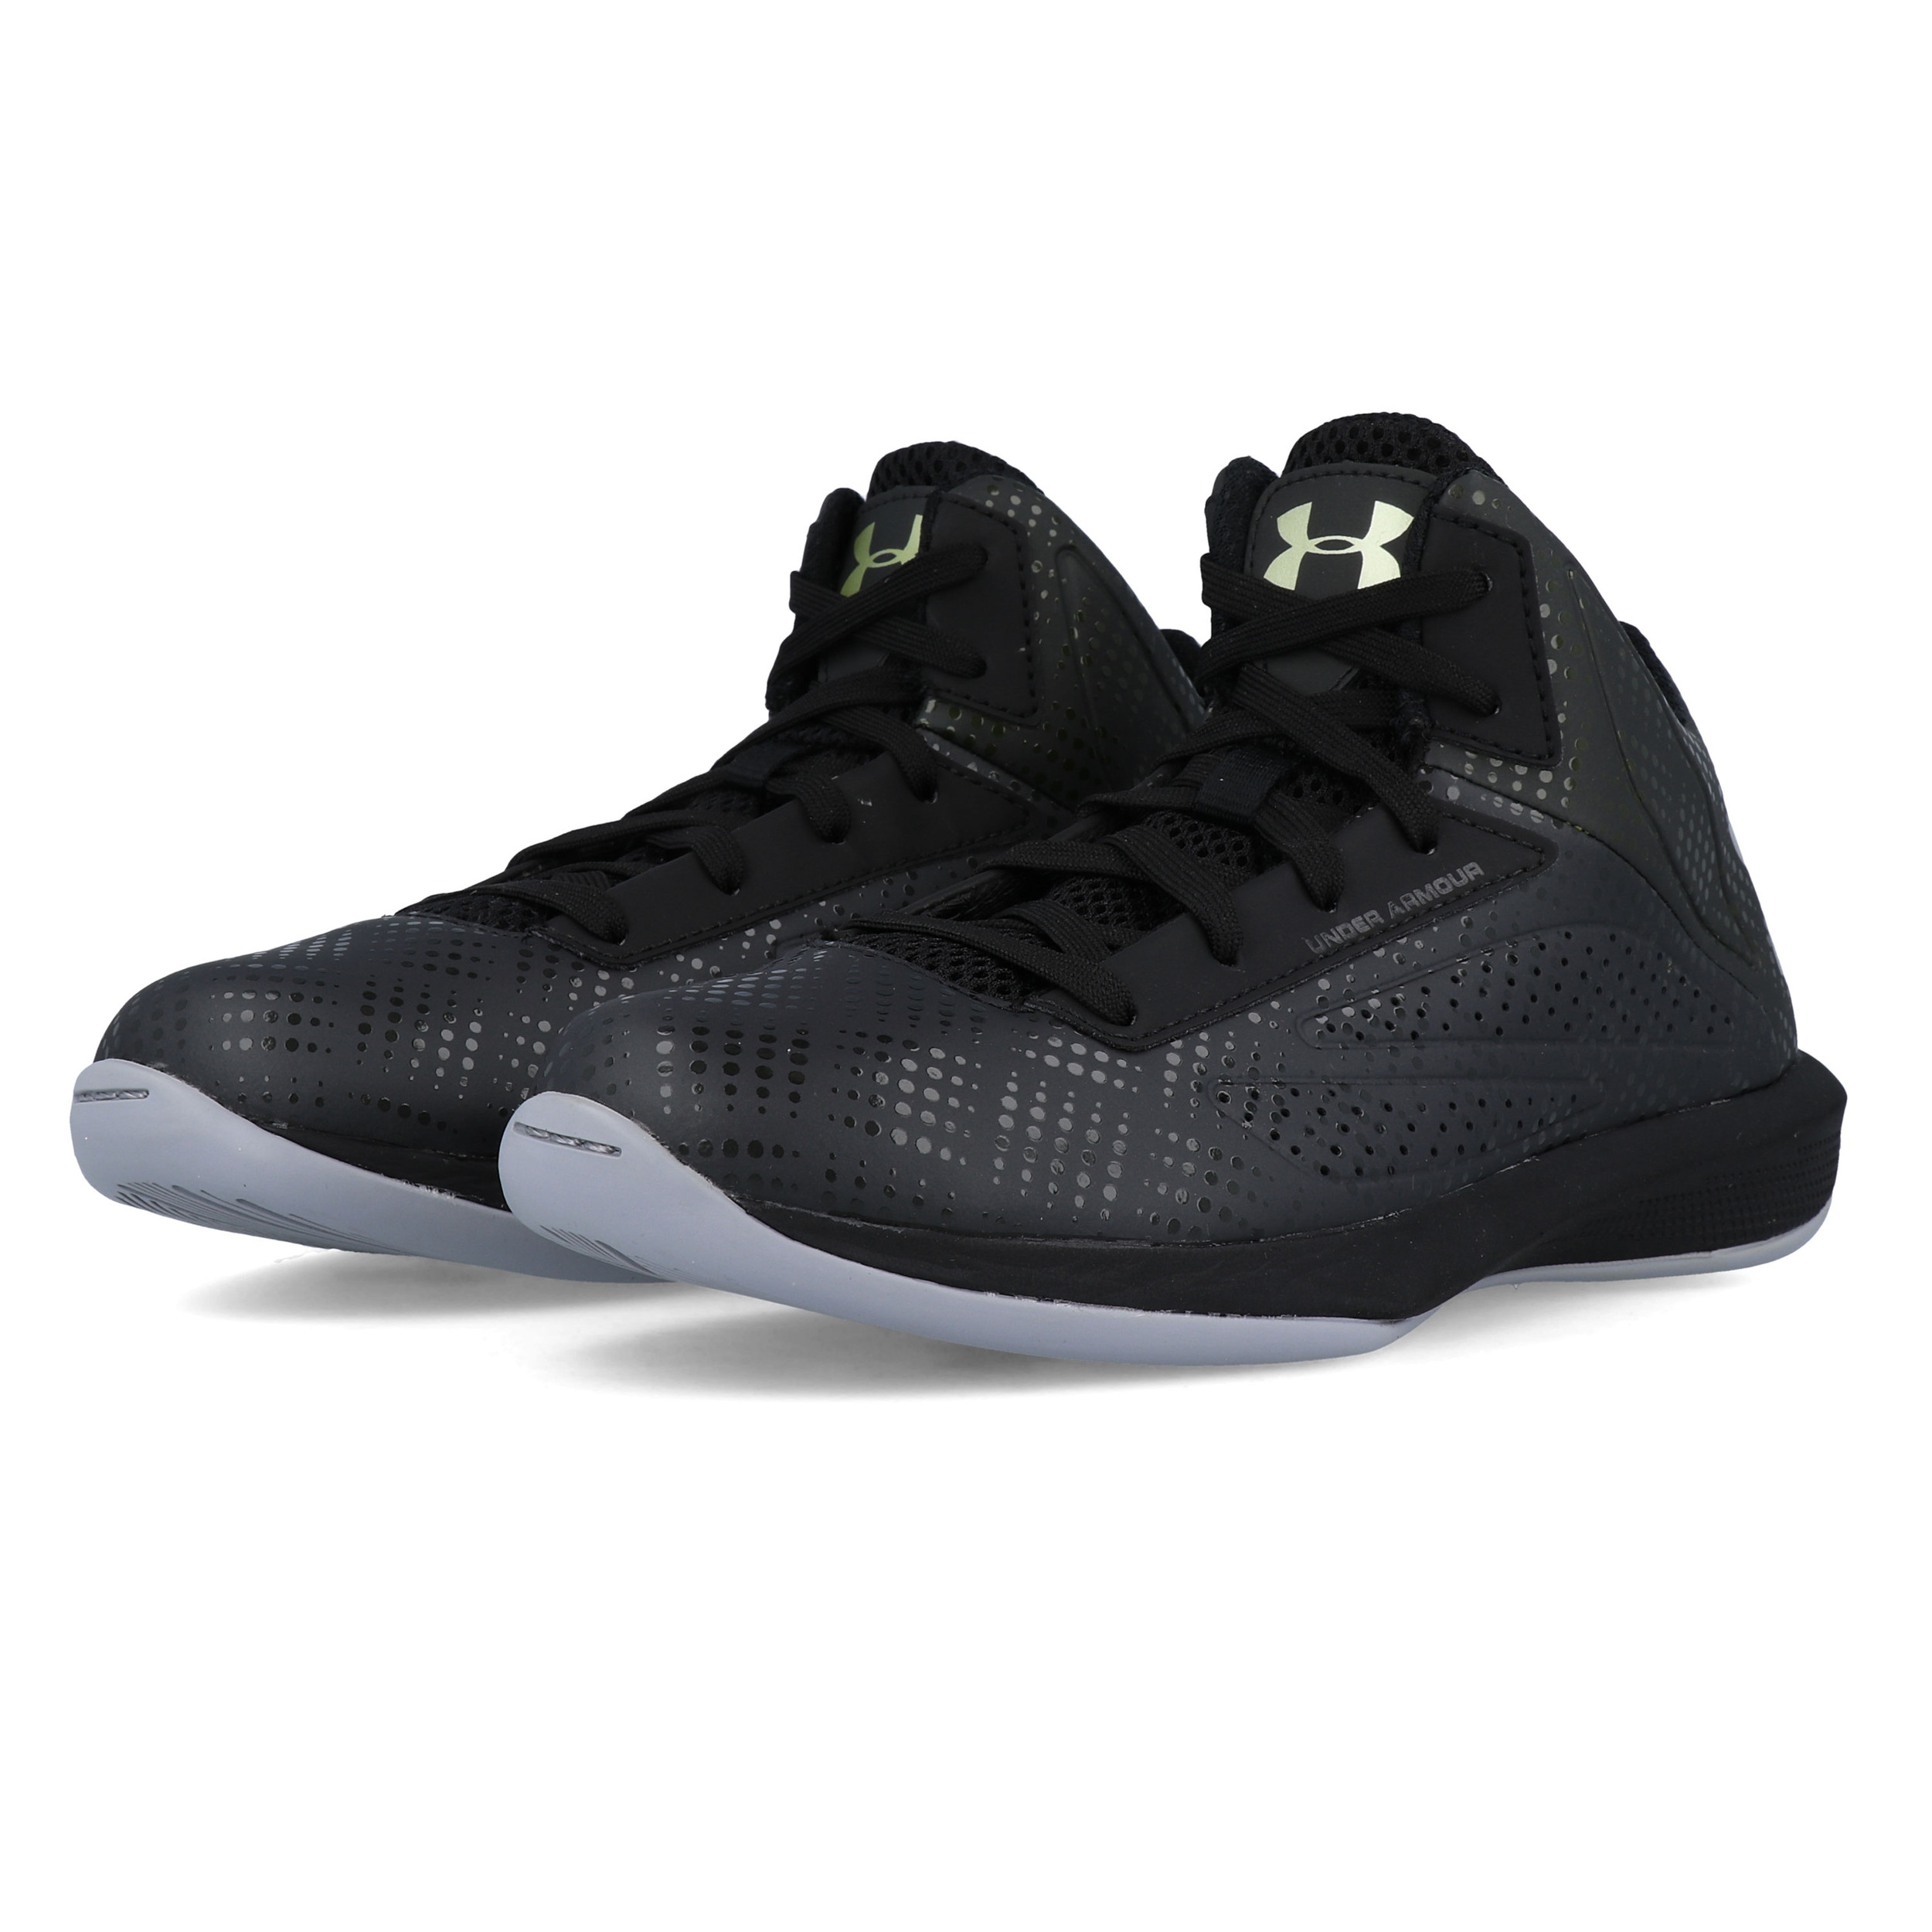 Under Armour Torch GS Junior Basketball Shoes